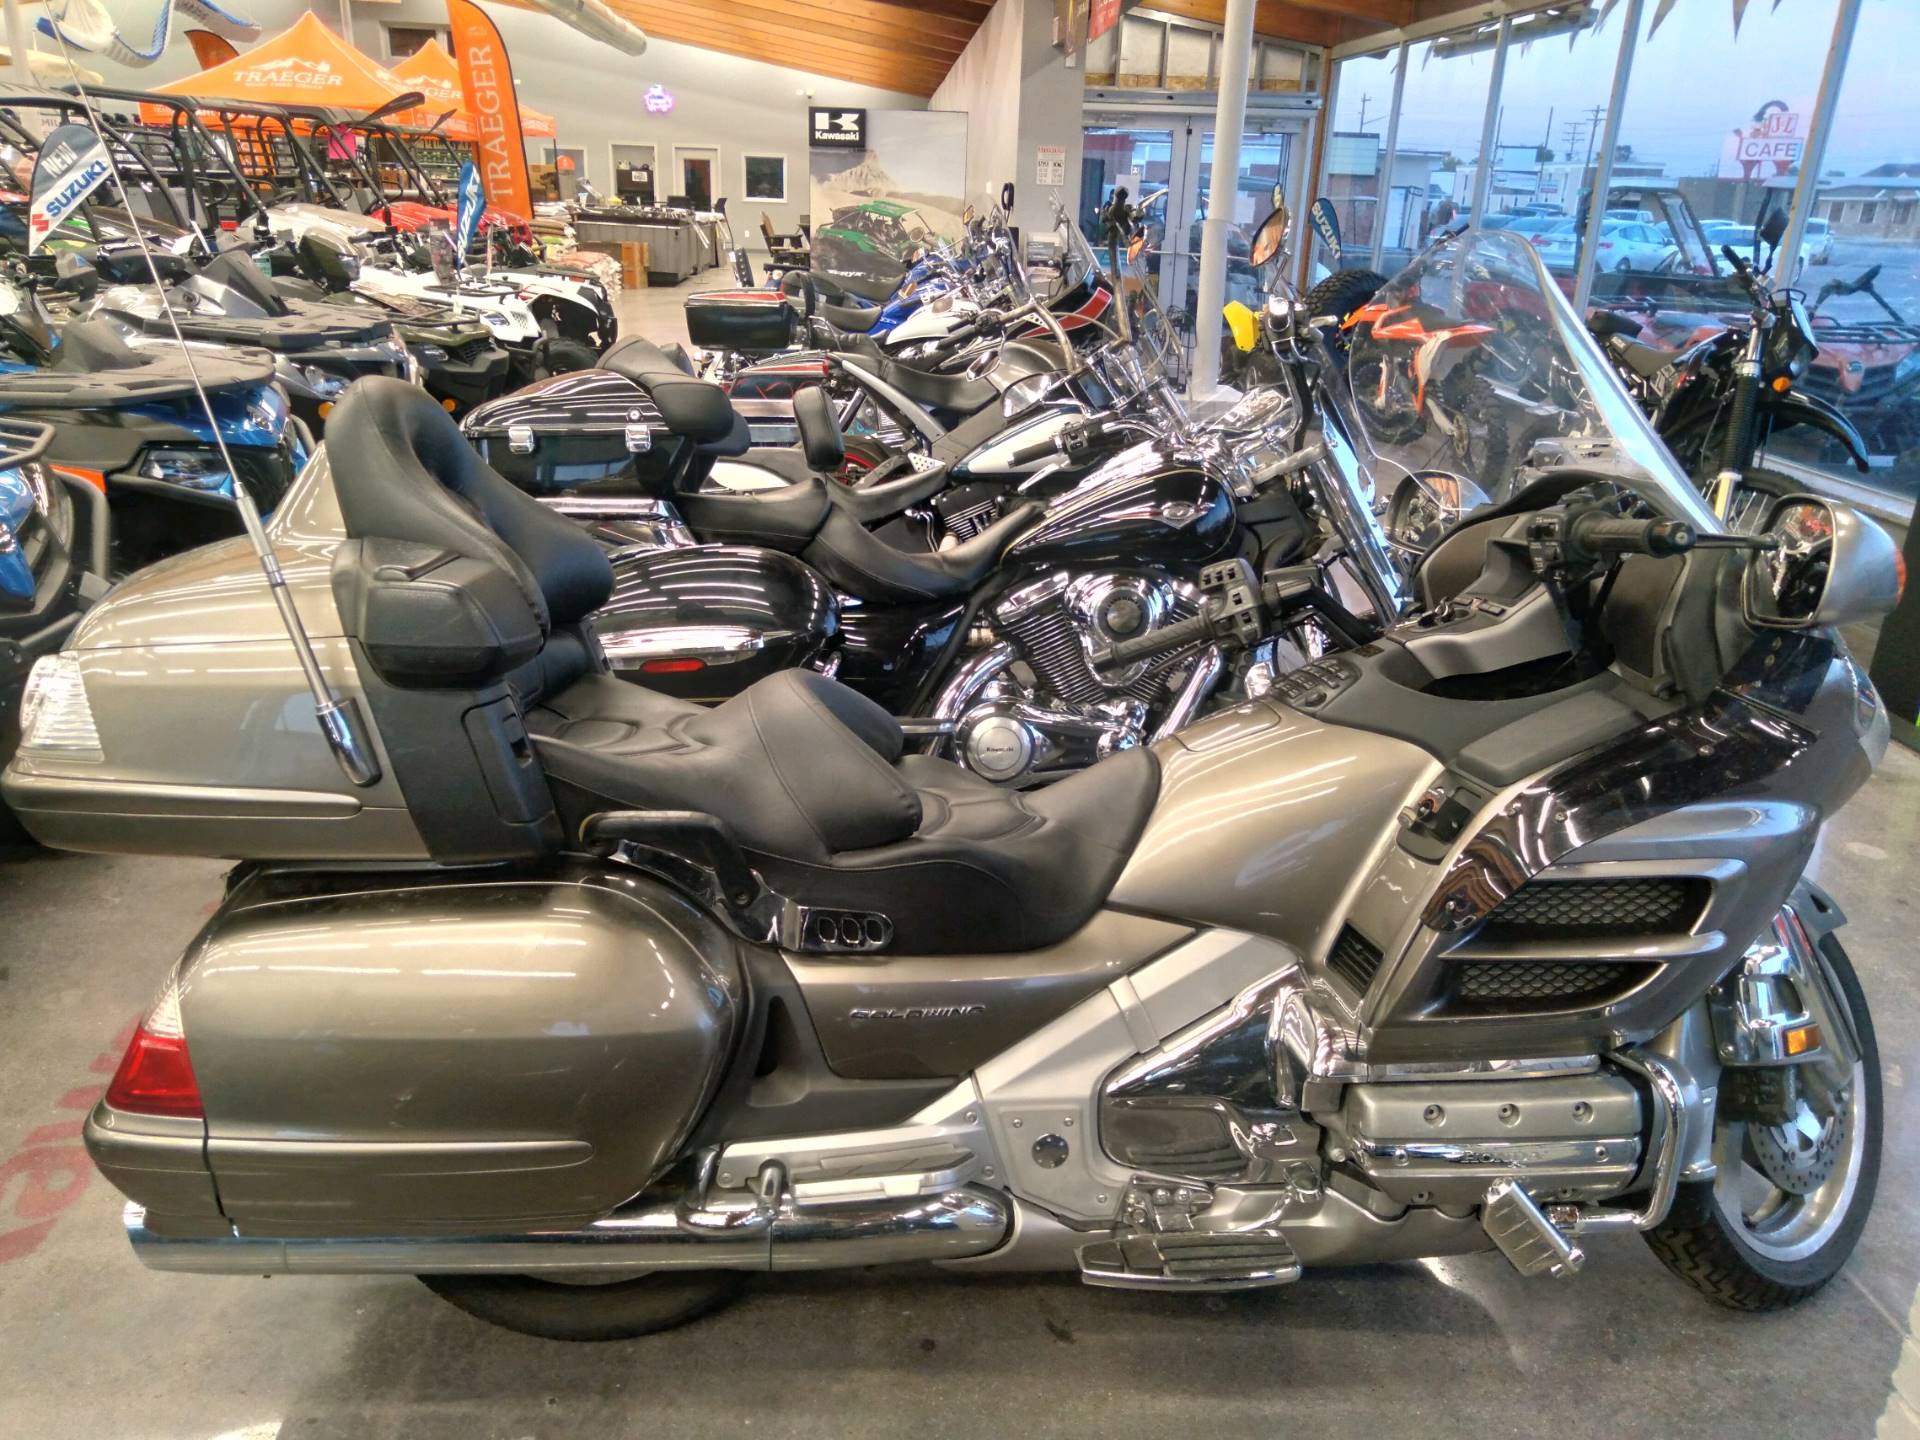 Used 2006 Honda Goldwing 1800 Motorcycles In Sterling Co Hon507880 Silver